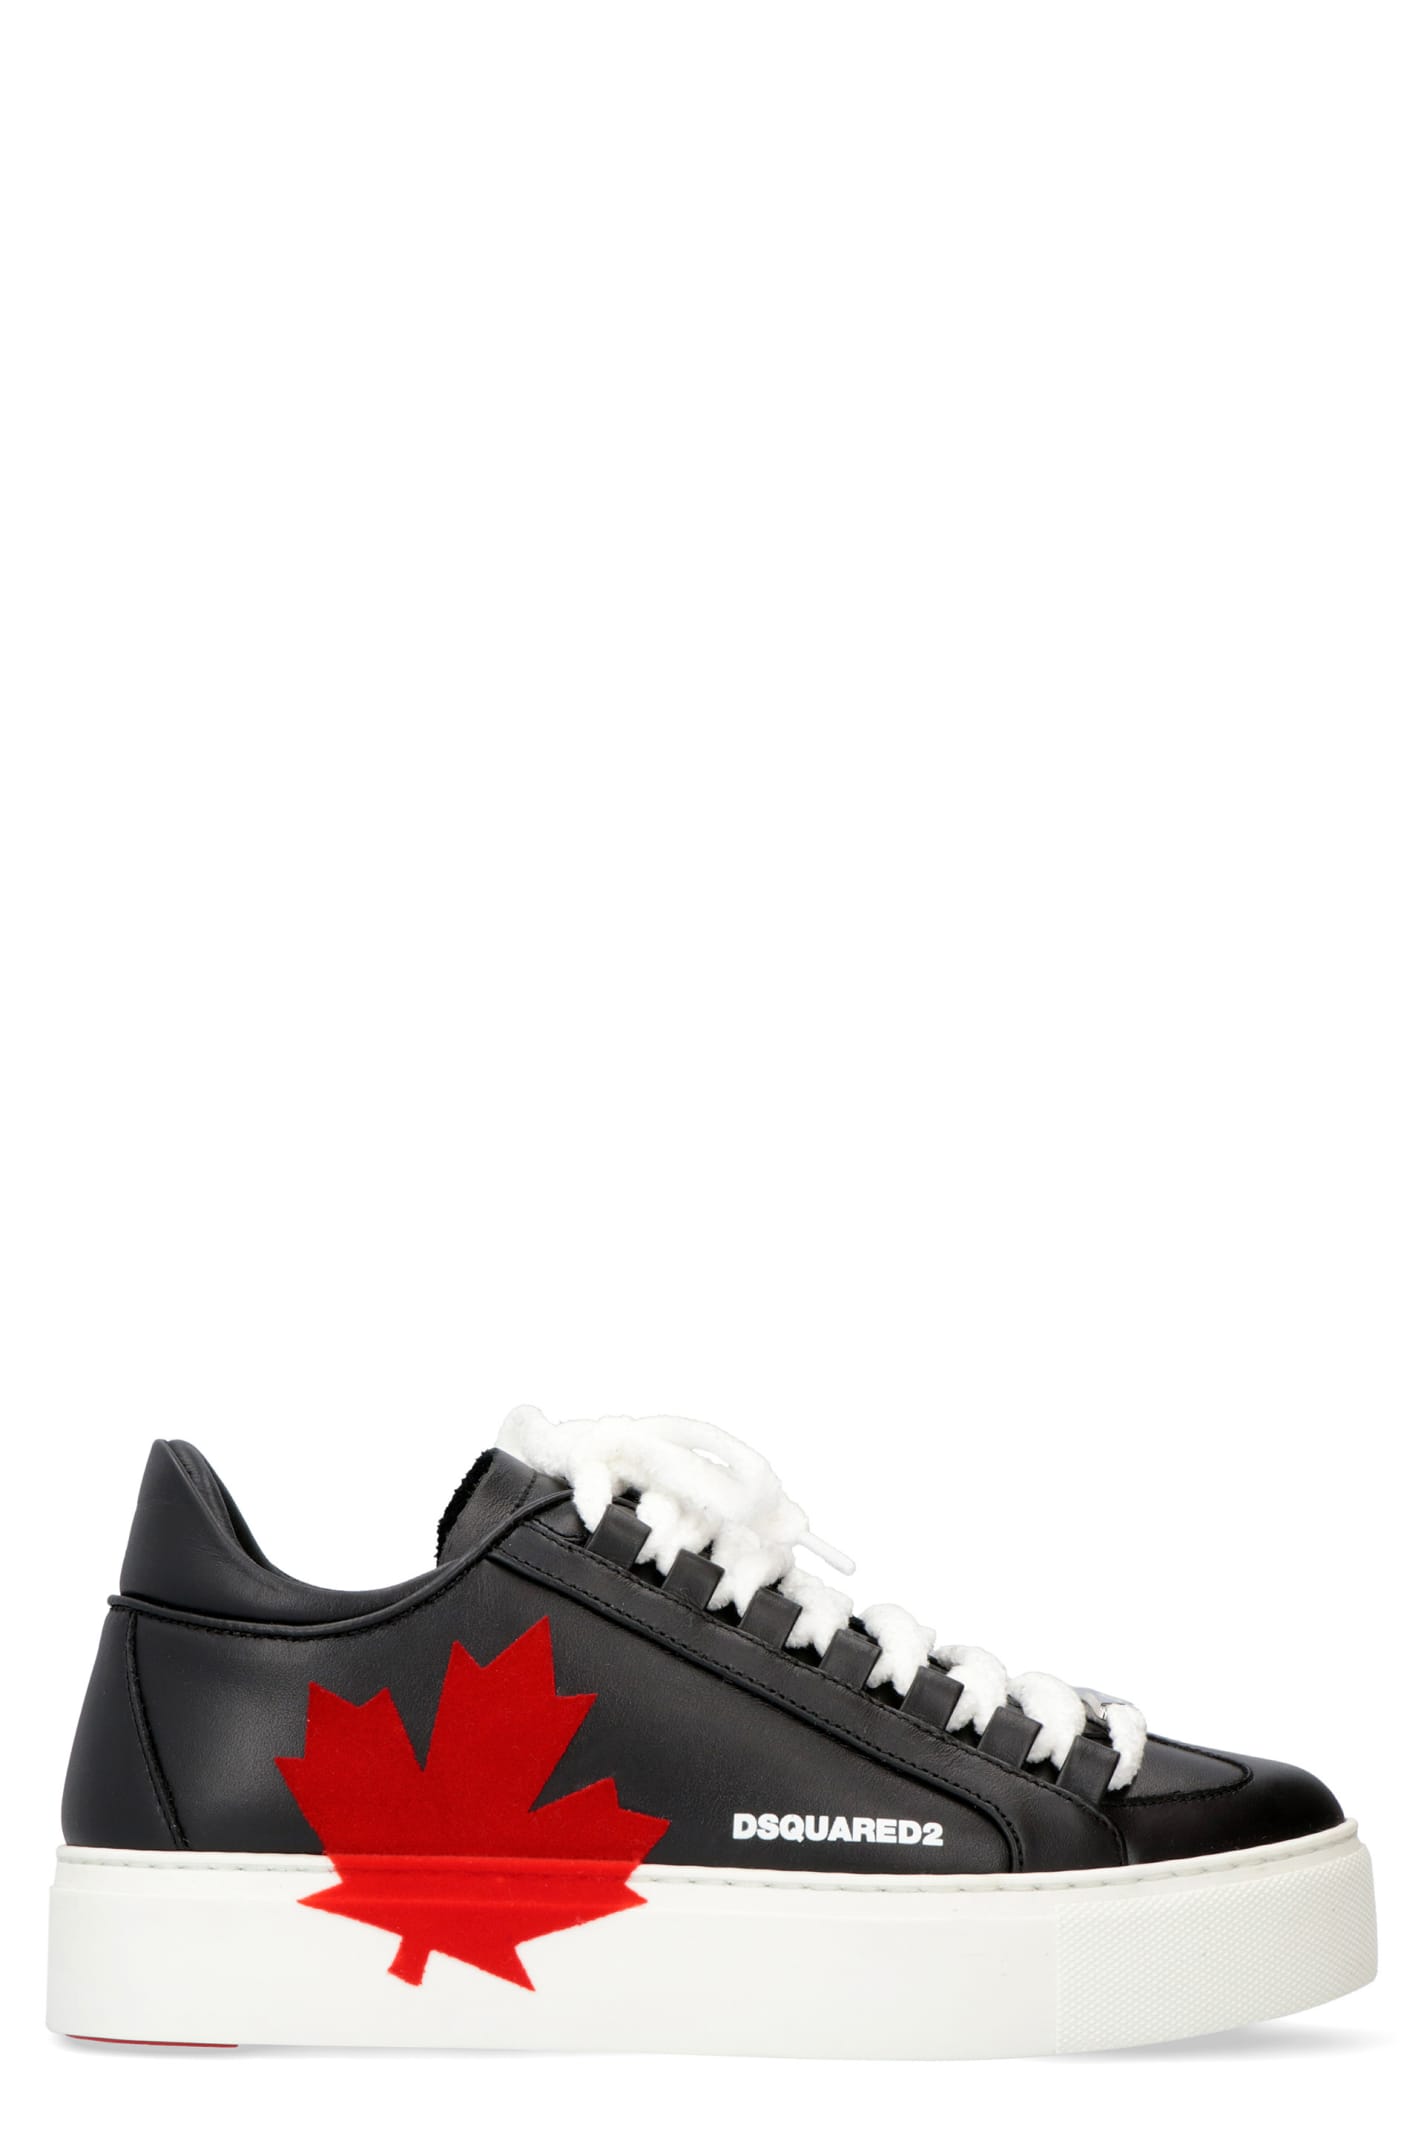 Dsquared2 Leather Platform Sneakers